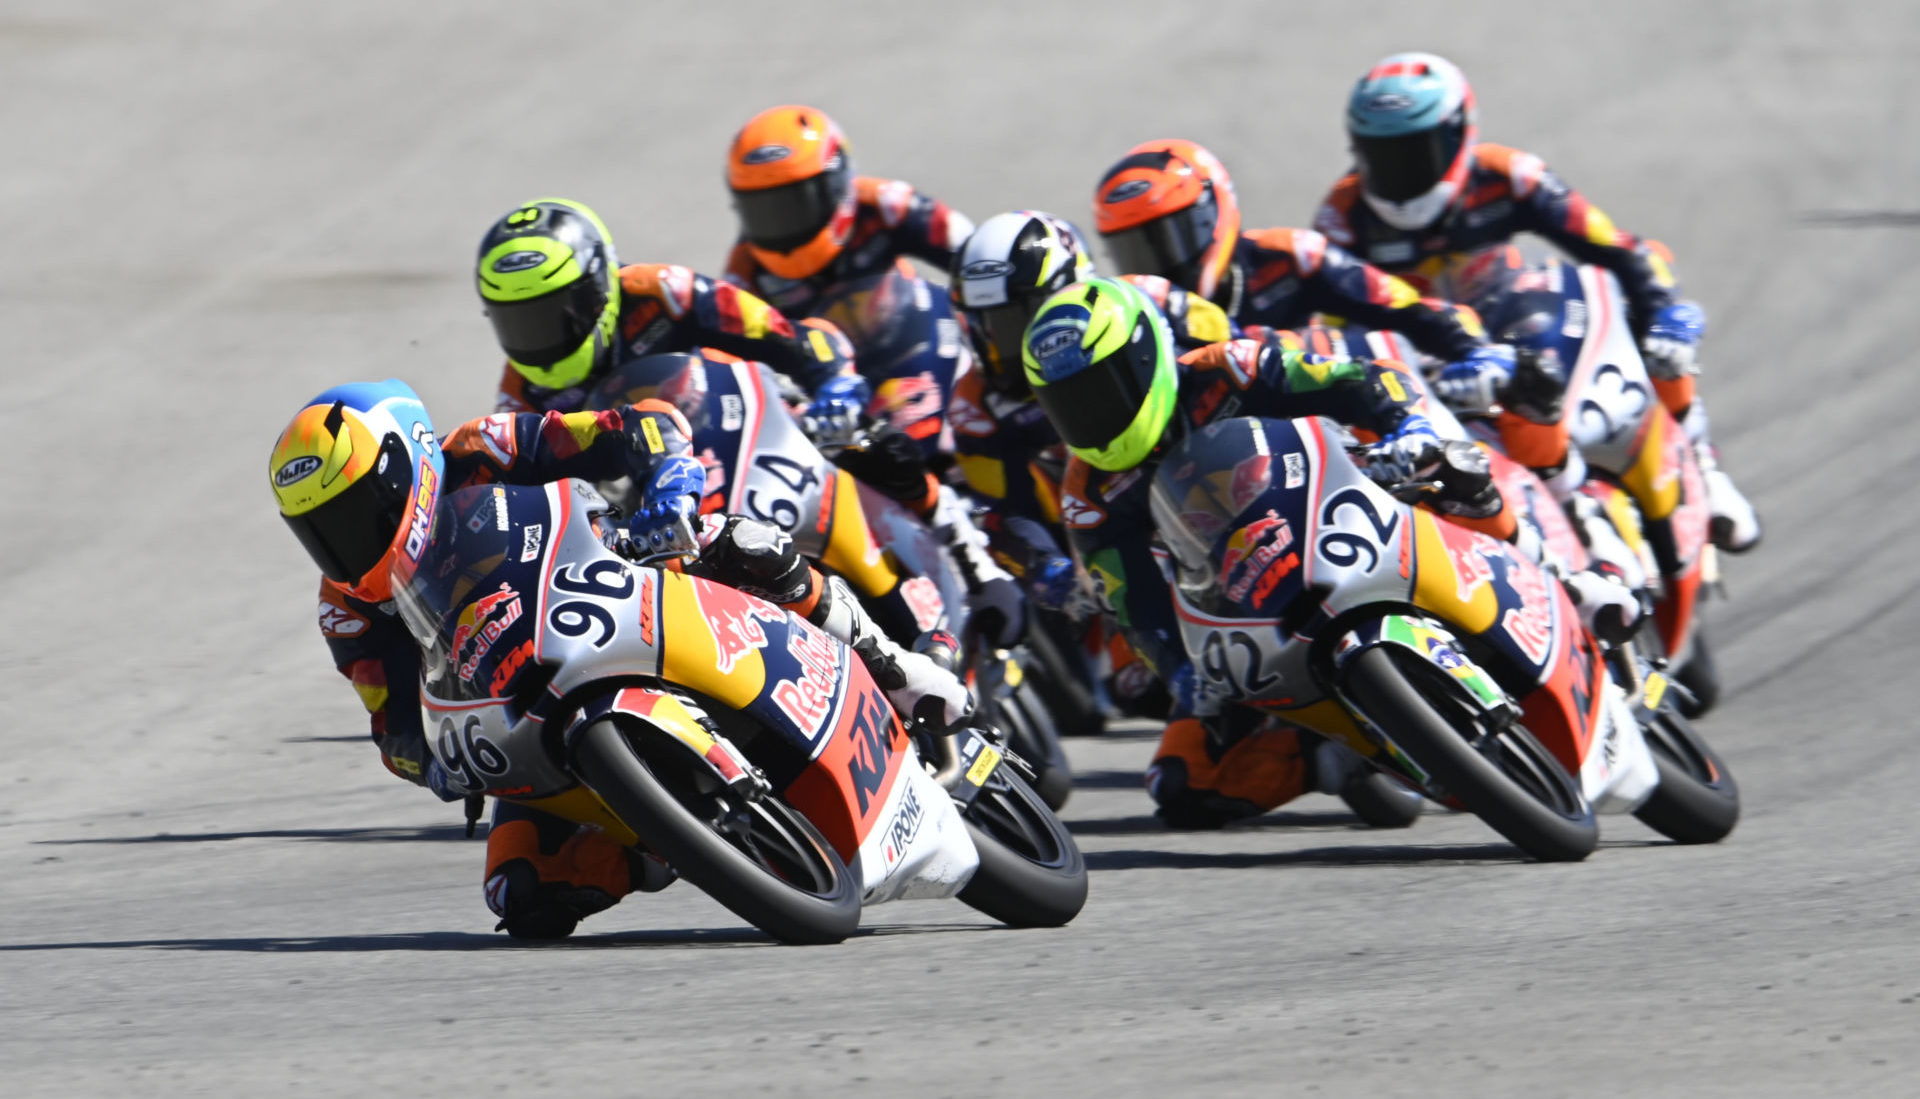 Daniel Holgado (96) leading a group of riders during Red Bull MotoGP Rookies Cup Race Two at Jerez. Photo courtesy Red Bull.